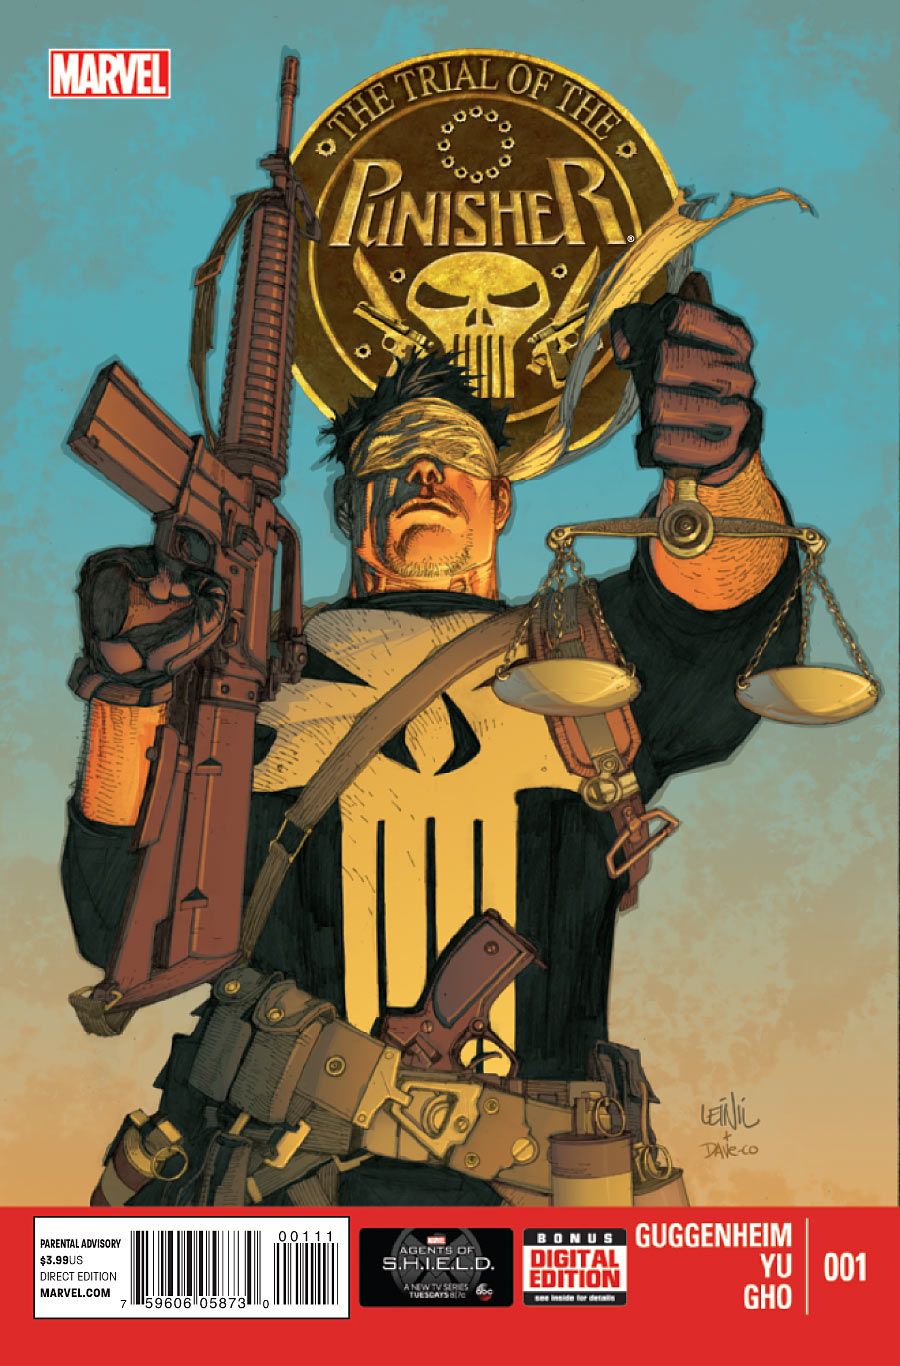 Punisher: Trial of the Punisher #1 Comic